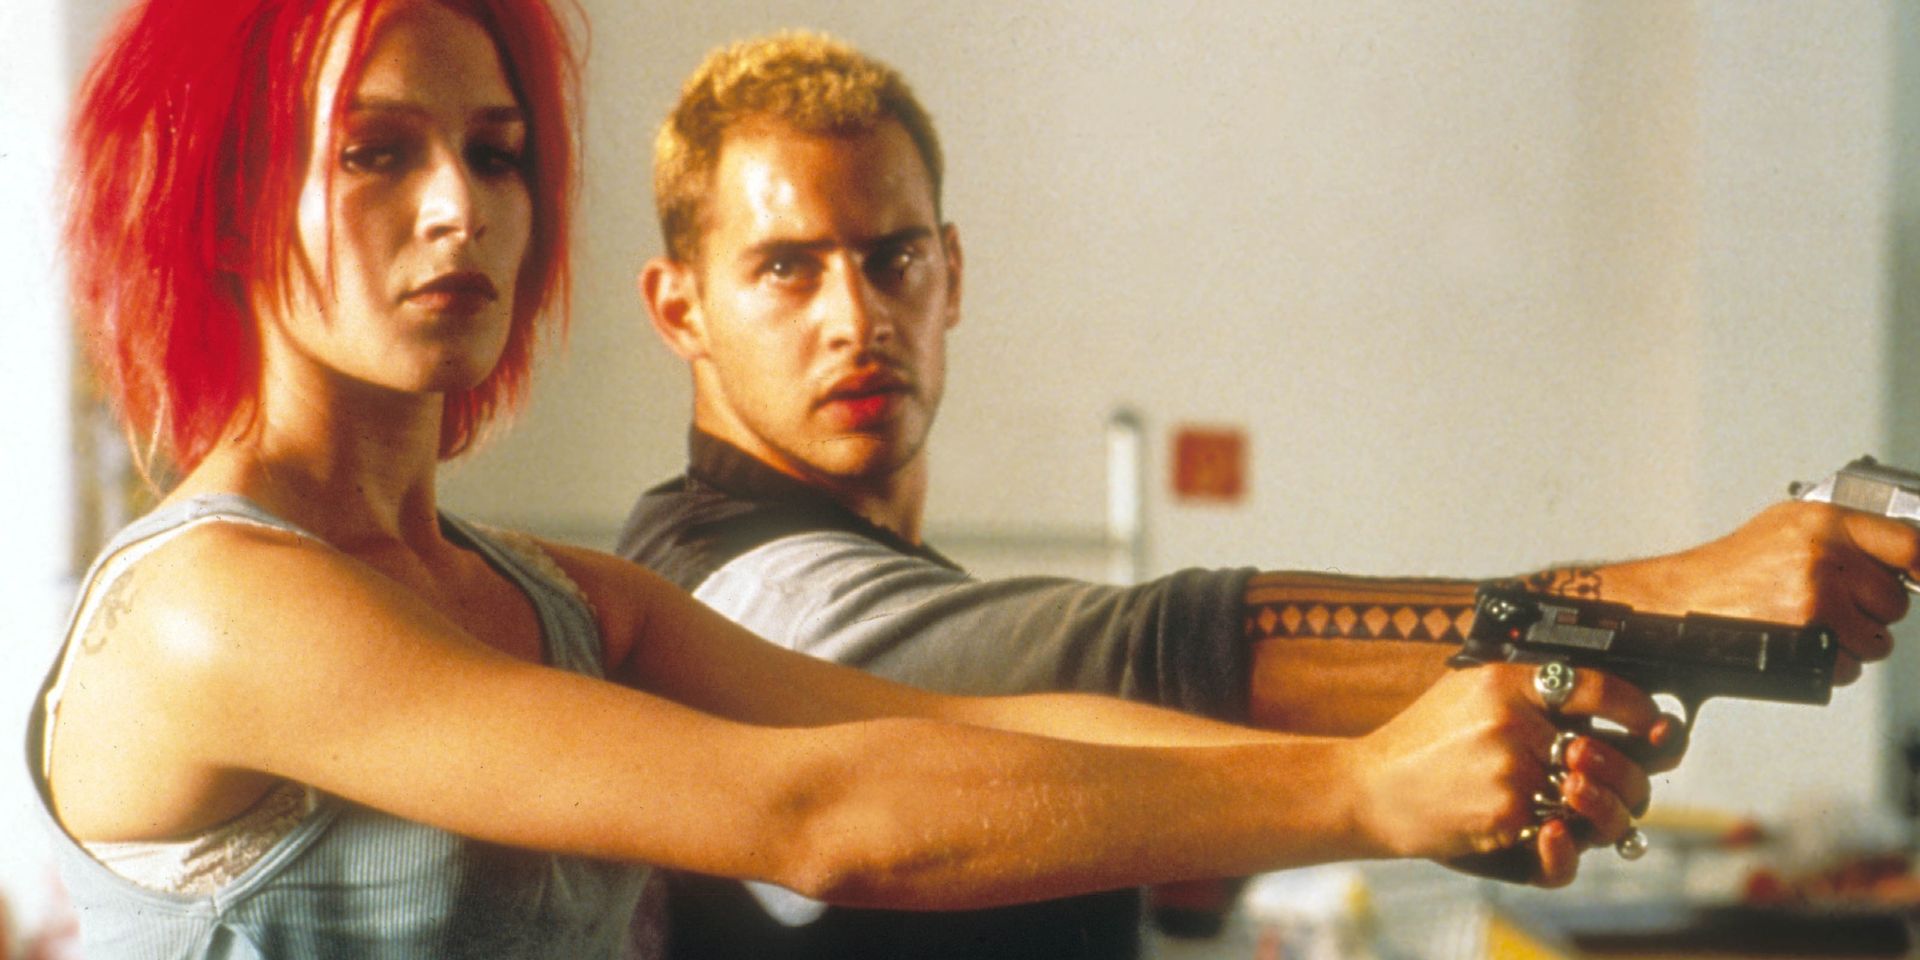 Lola and Manni in a Butterfly Effect-style Run Lola Run